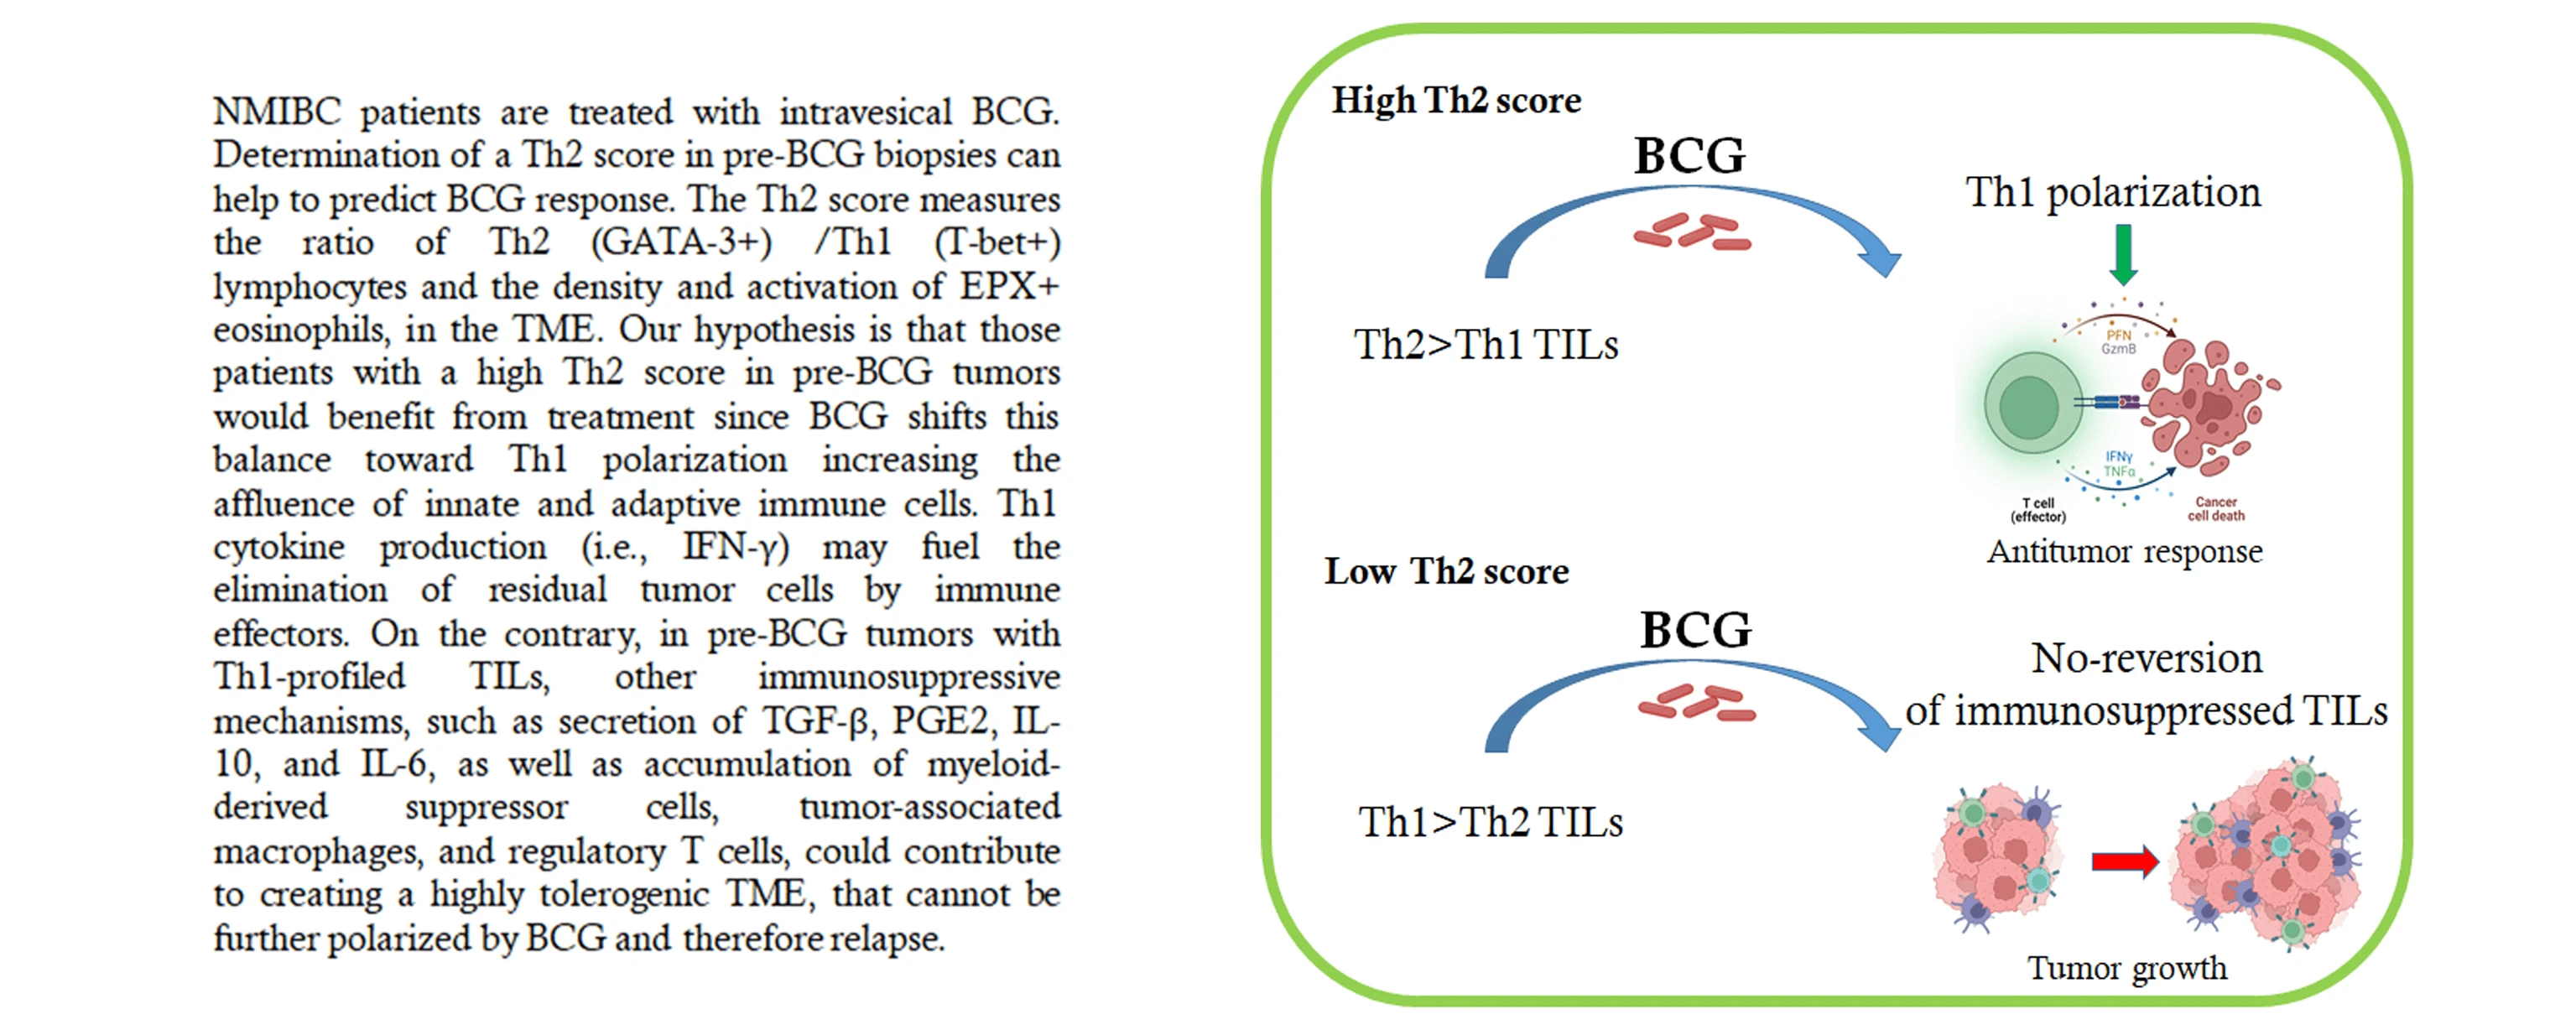 A Th2-score in the tumor microenvironment as a predictive biomarker of response to Bacillus Calmette Guérin in patients with non-muscle invasive bladder carcinoma: A retrospective study